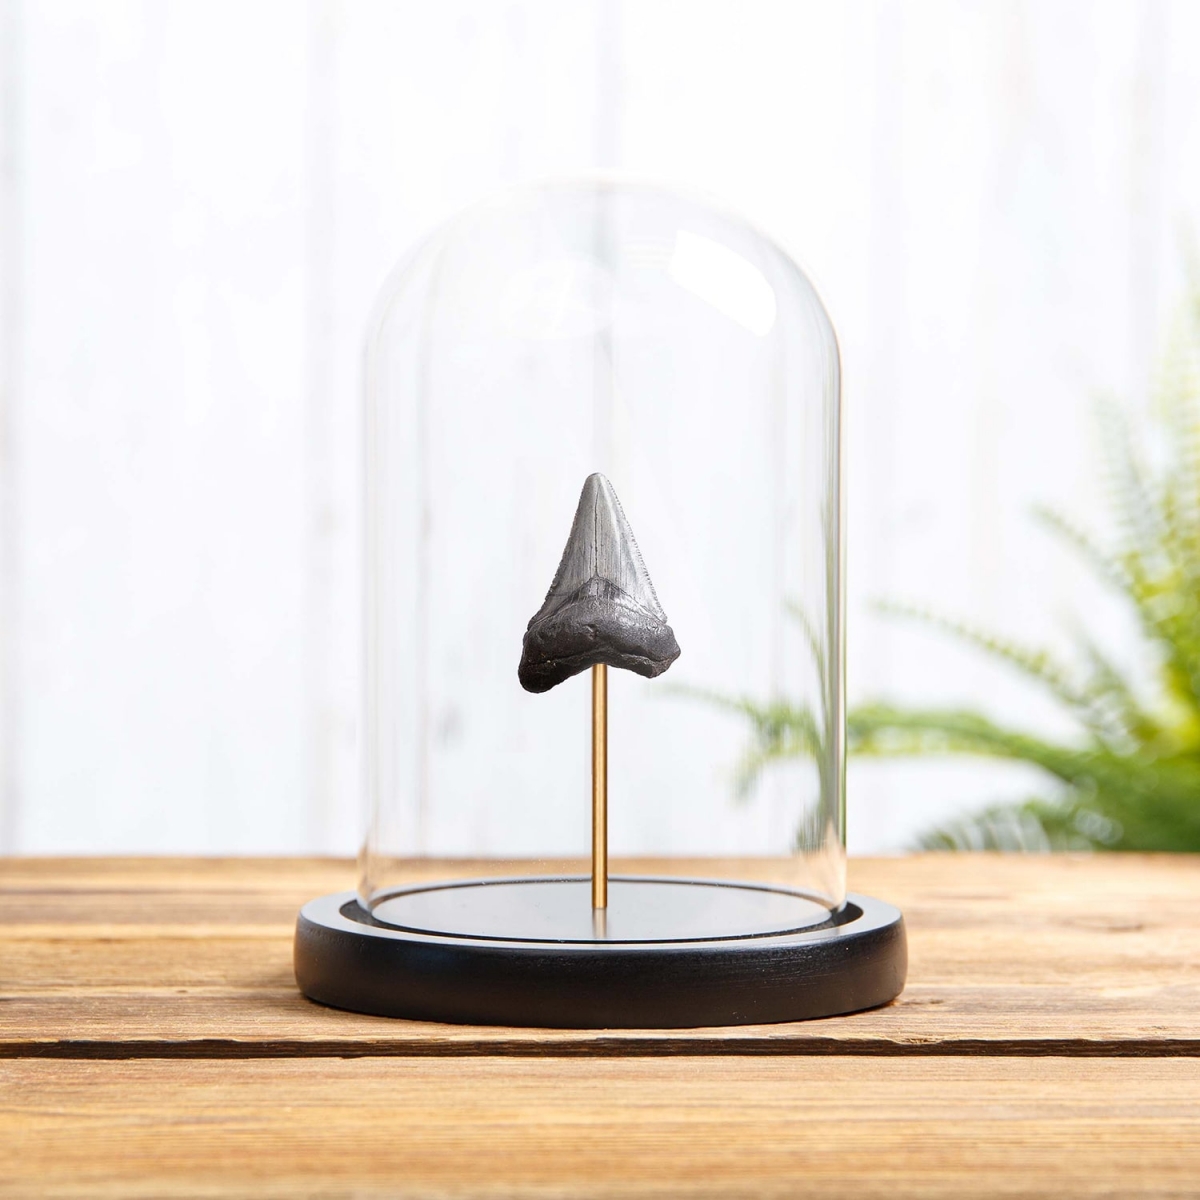 Minibeast 1-1.5 Inch Megalodon Shark Tooth Fossil in Glass Dome with Wooden Base (Carcharodon megalodon)